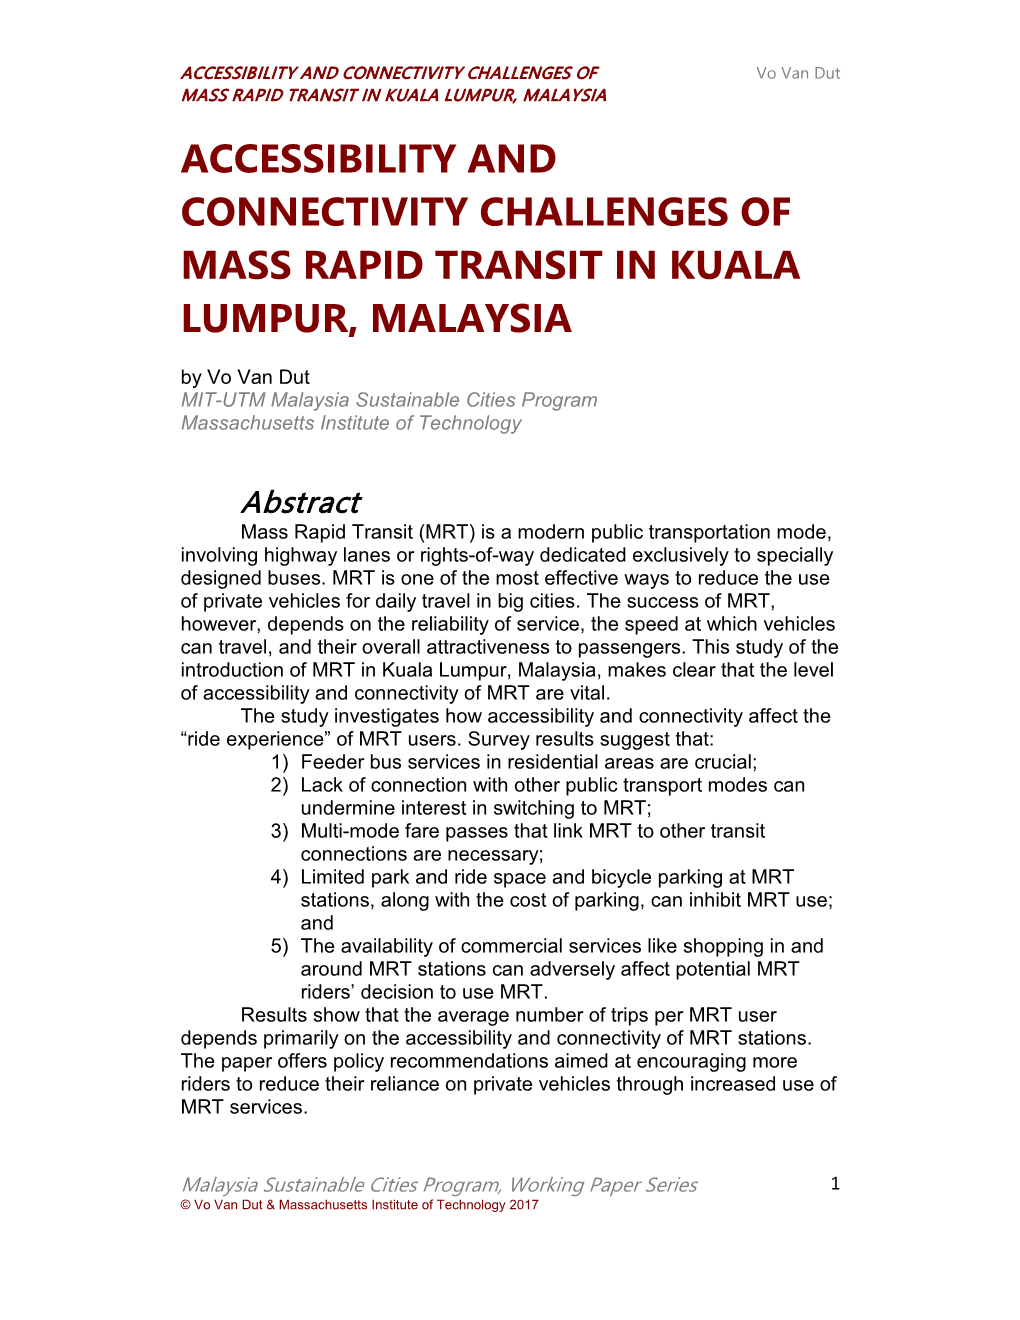 Accessibility and Connectivity Challenges of Mass Rapid Transit in Kuala Lumpur, Malaysia